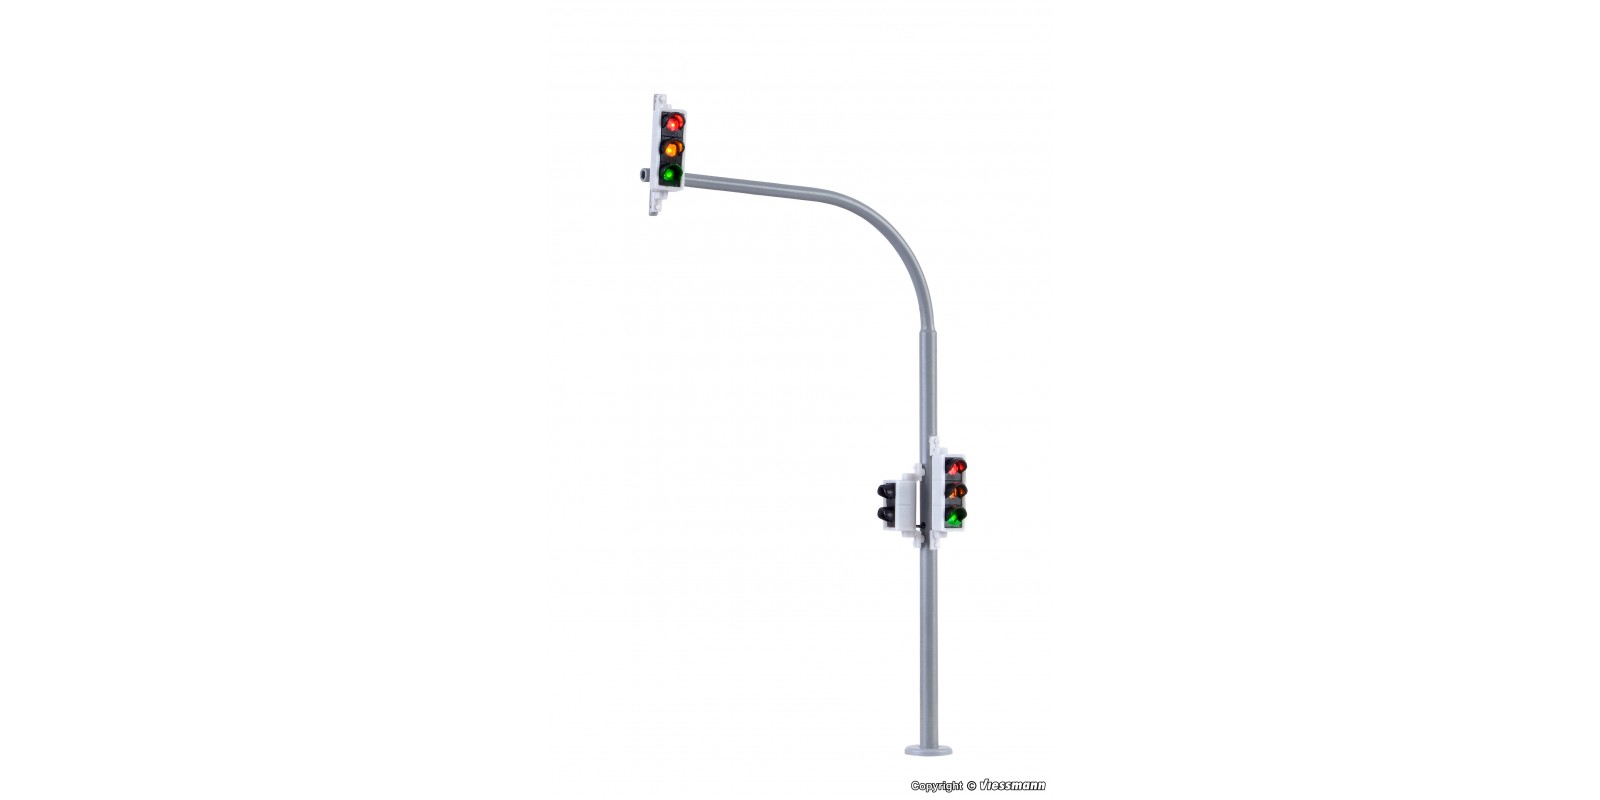 VI5094 H0 Arc traffic light with pedestrian signal and LEDs, 2 pieces